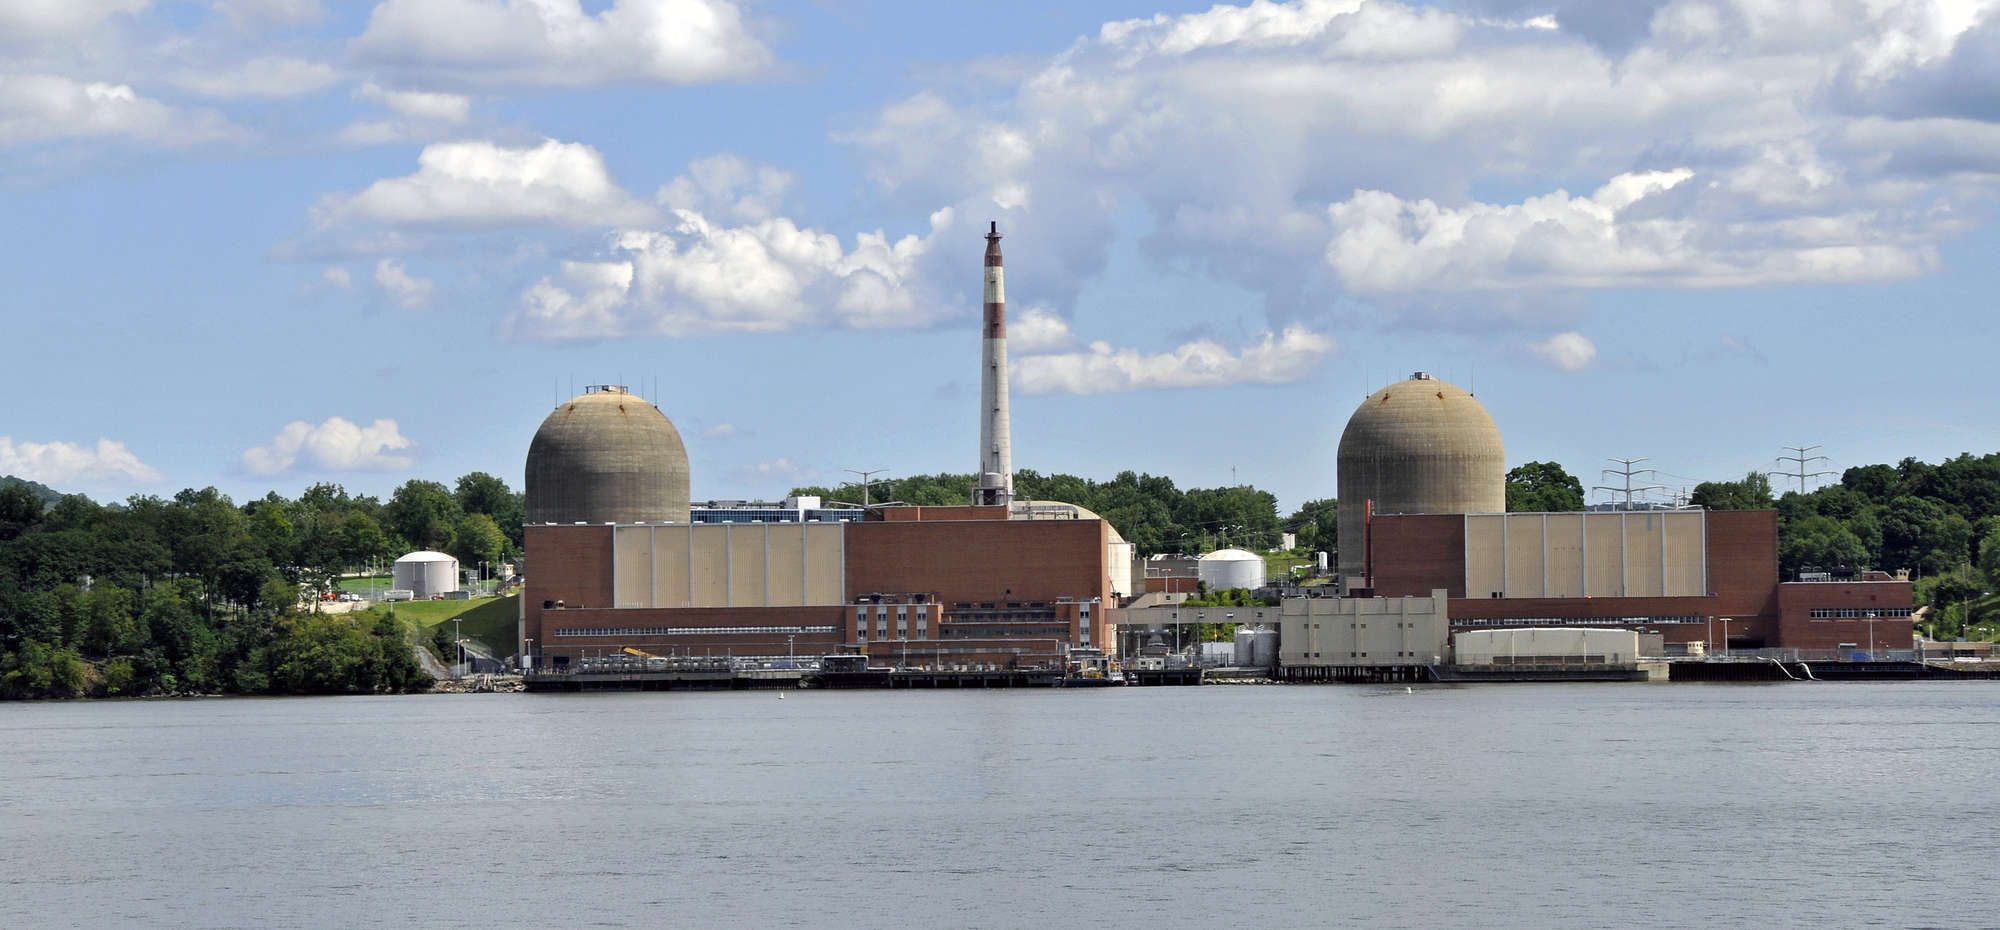 Radioactive material found in groundwater below nuke plant in New York, Radioactive material found in groundwater below Indian Point Energy Center New York City, Indian Point Energy Center New York City leaks, leaking at Indian Point Energy Center New York City